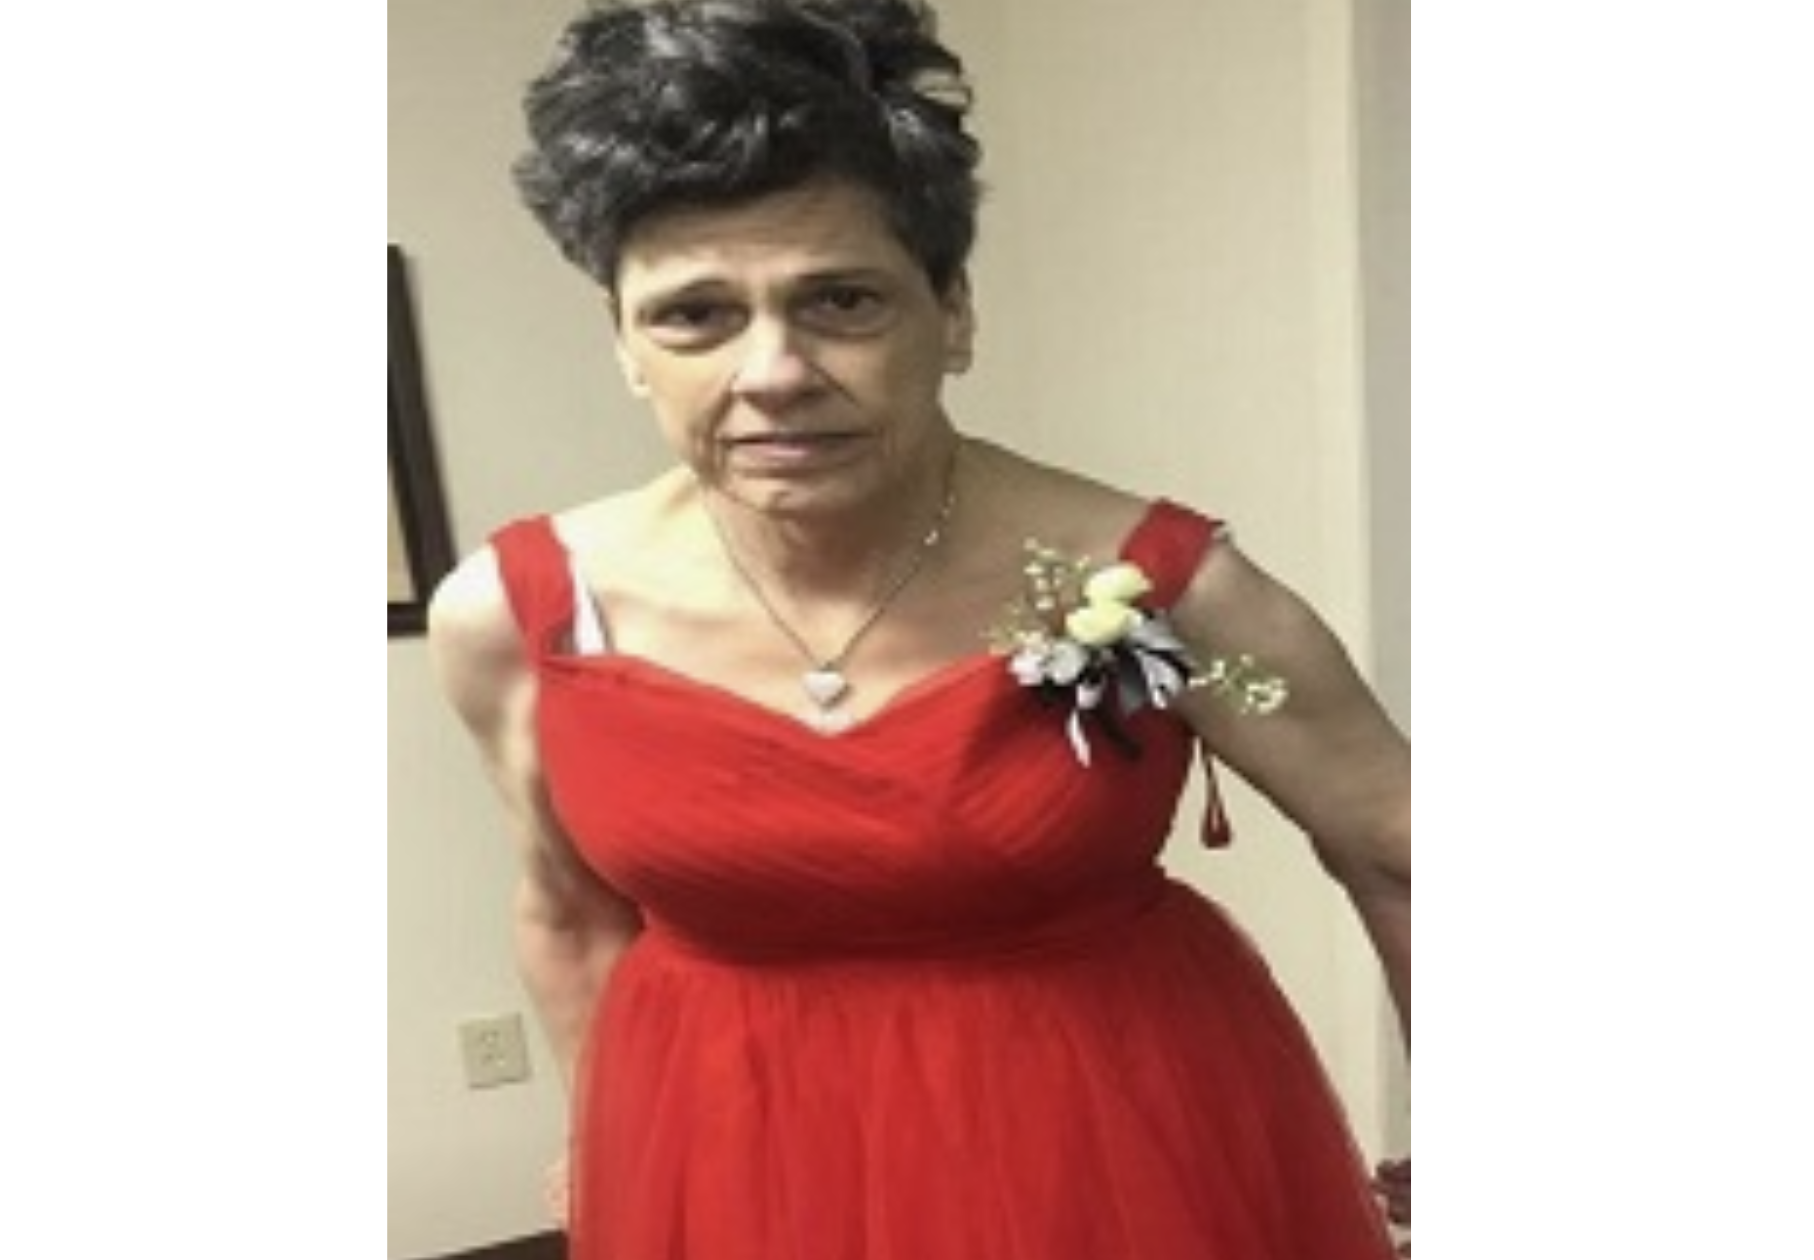 UPDATE: Missing and Endangered Person Alert for Joy Maddox canceled